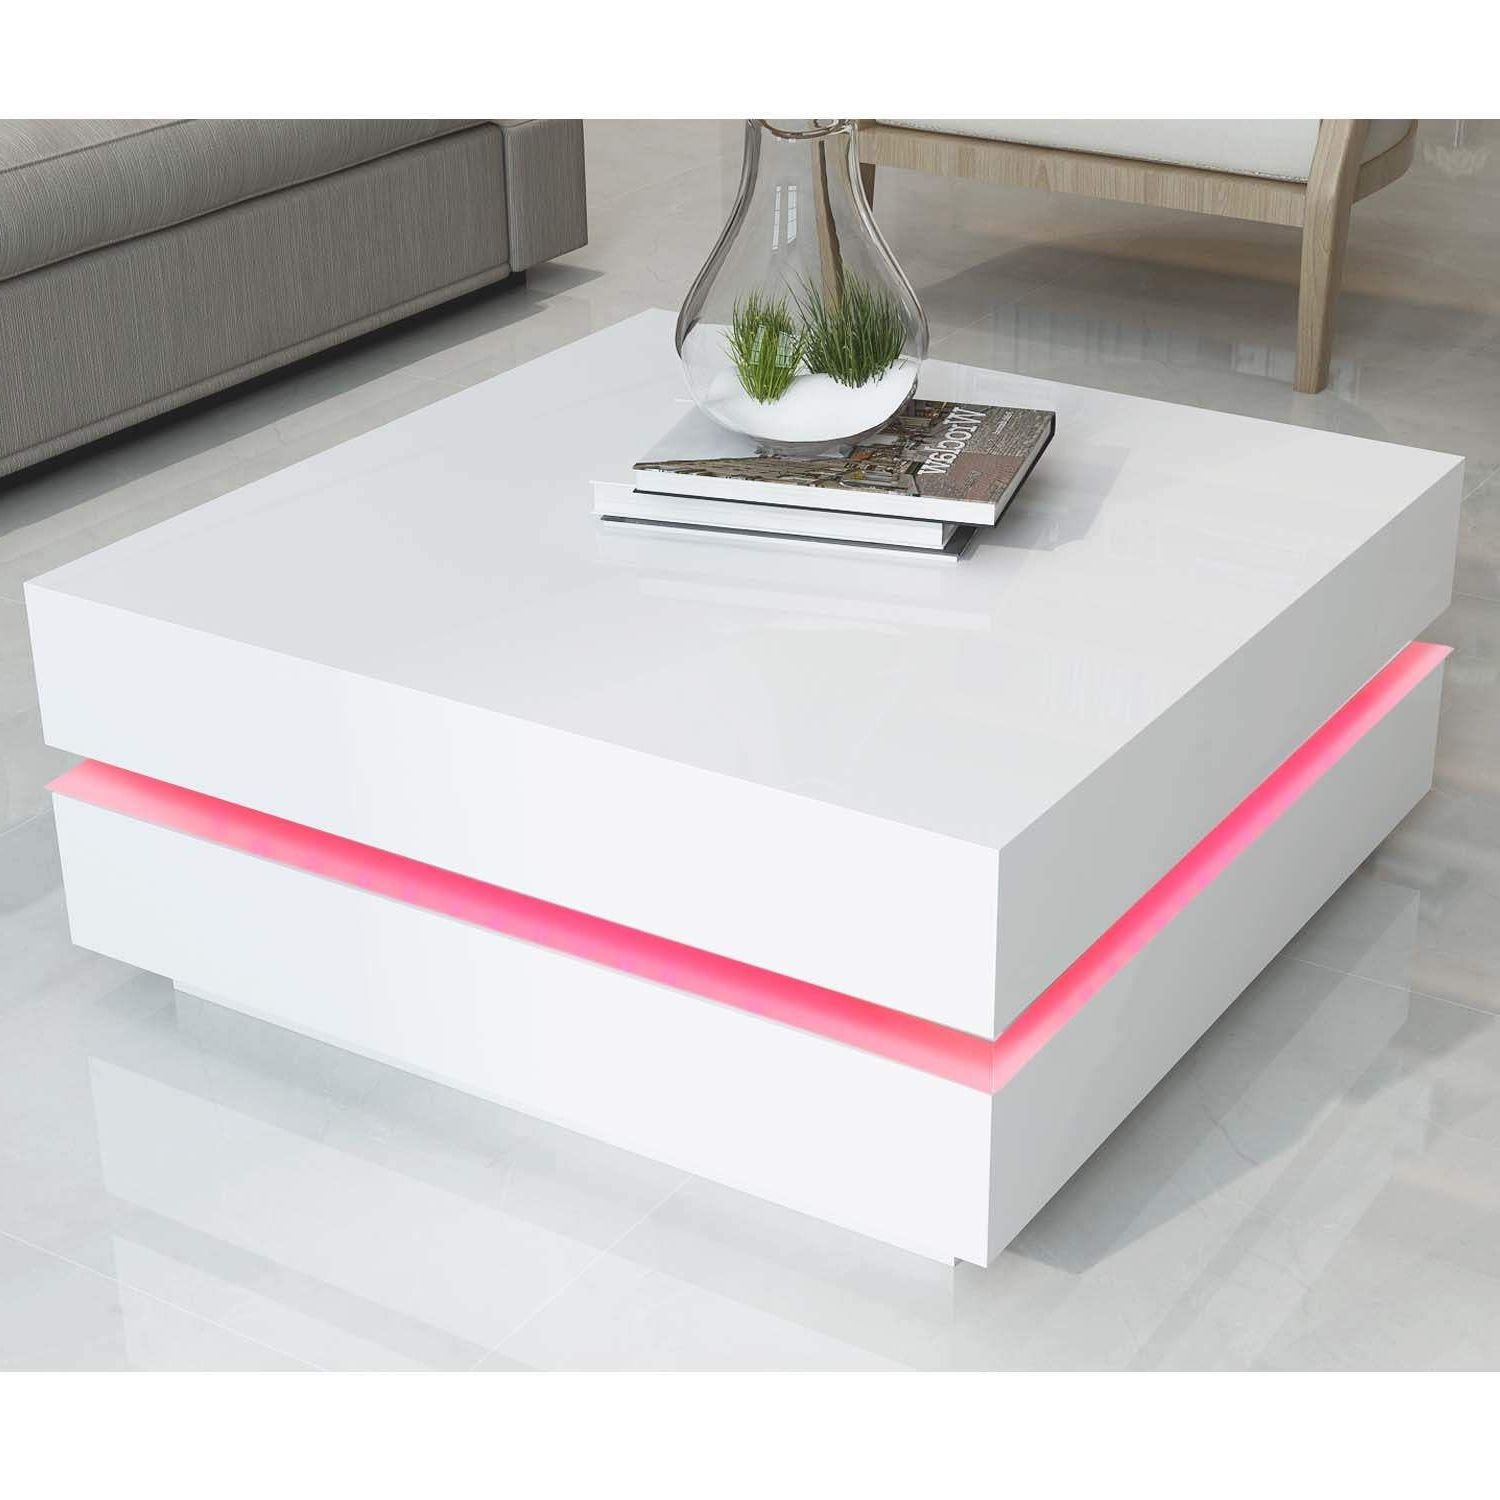 Most Popular Gloss White Steel Coffee Tables In Buy Tiffany White High Gloss Cubic Led Coffee Table From Furniture (View 3 of 10)